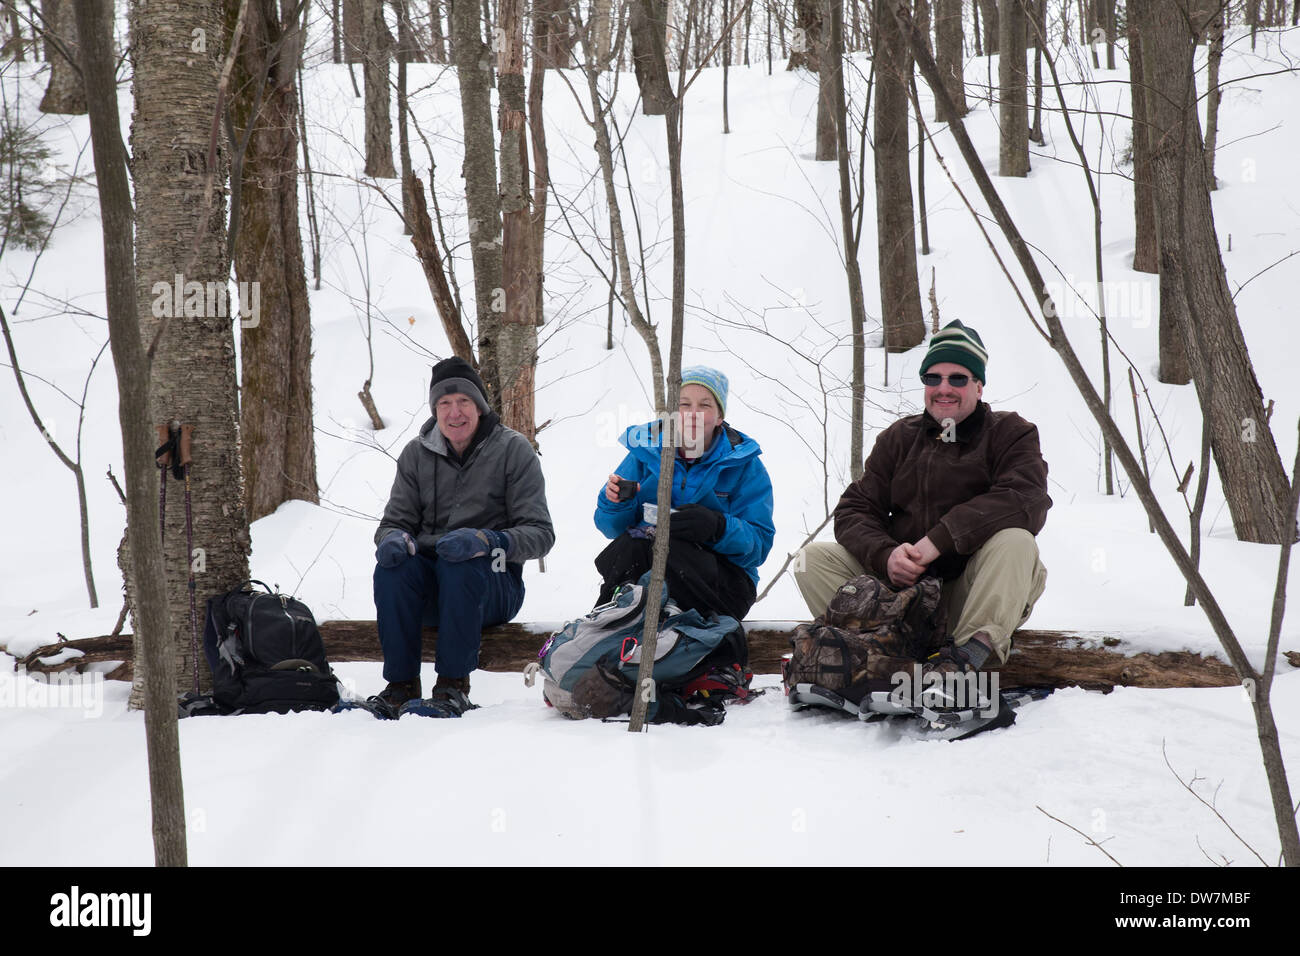 Winter hikers relax and rest along a snow-covered trail on Mount Greylock, Adams, MA. Stock Photo